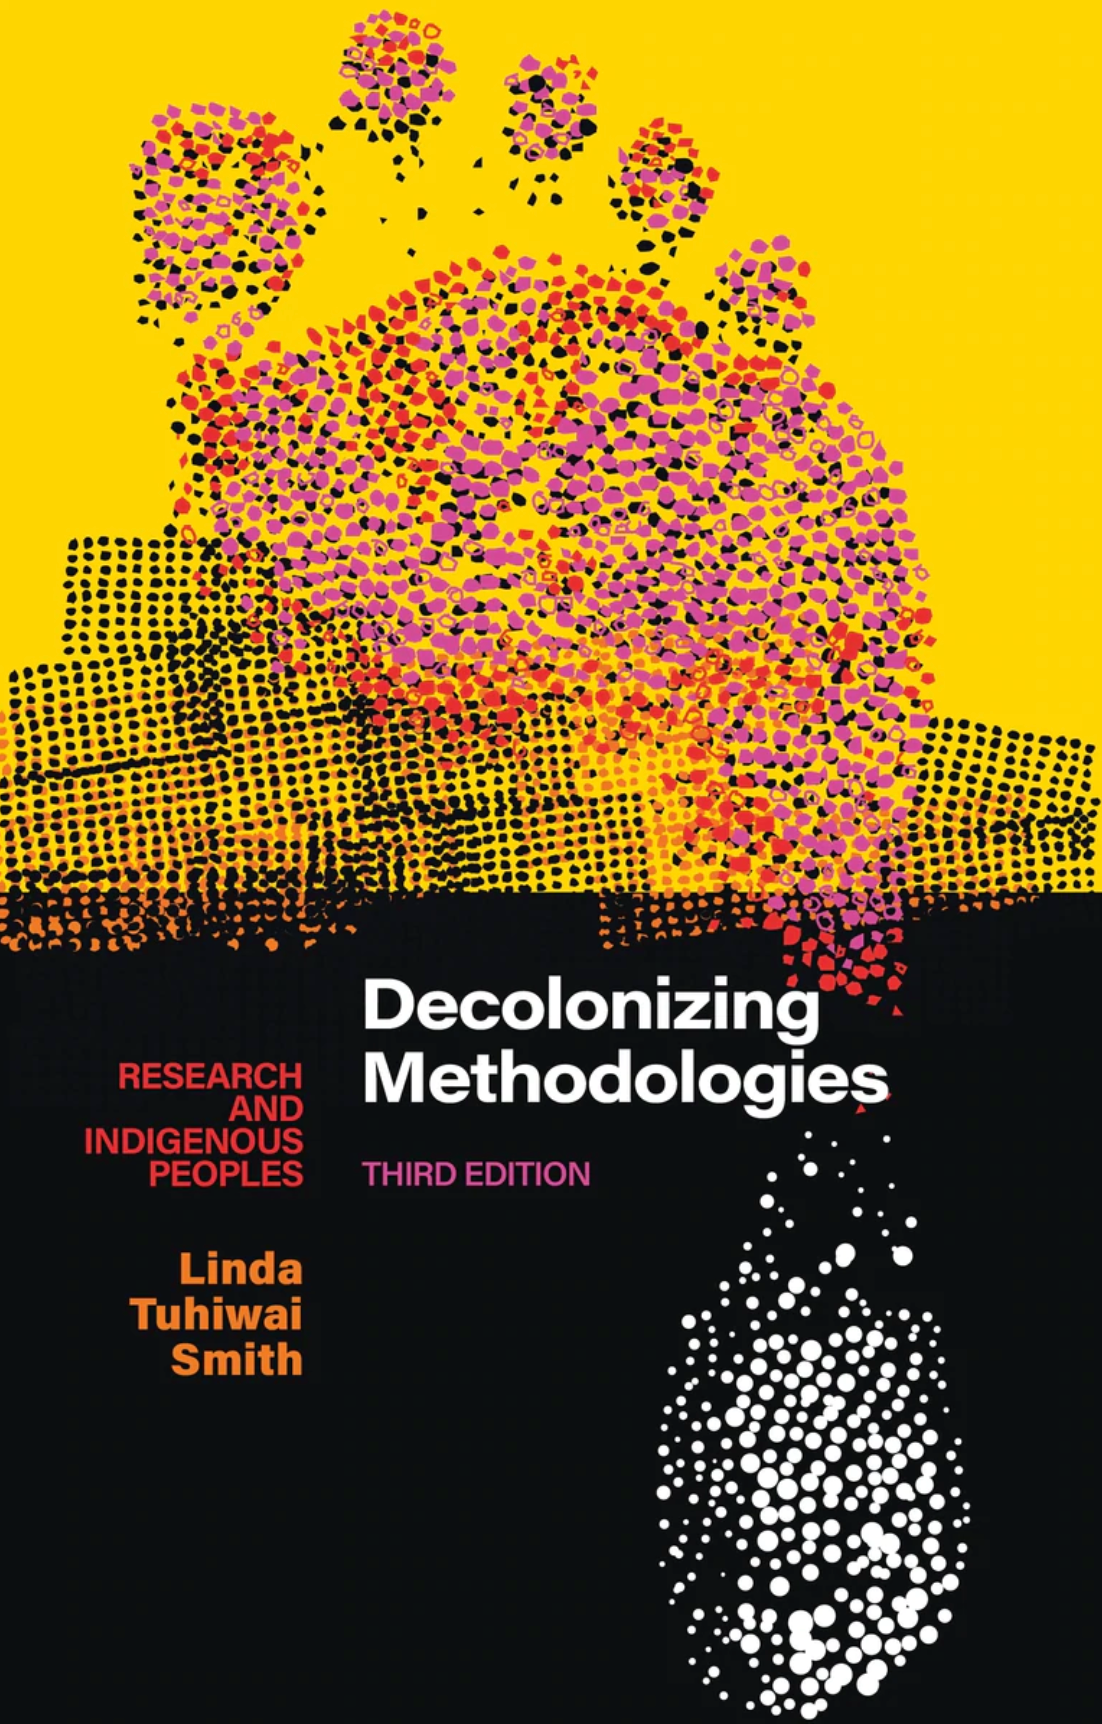 Decolonizing Methodologies // Research & Indigenous Peoples (3rd Edition)